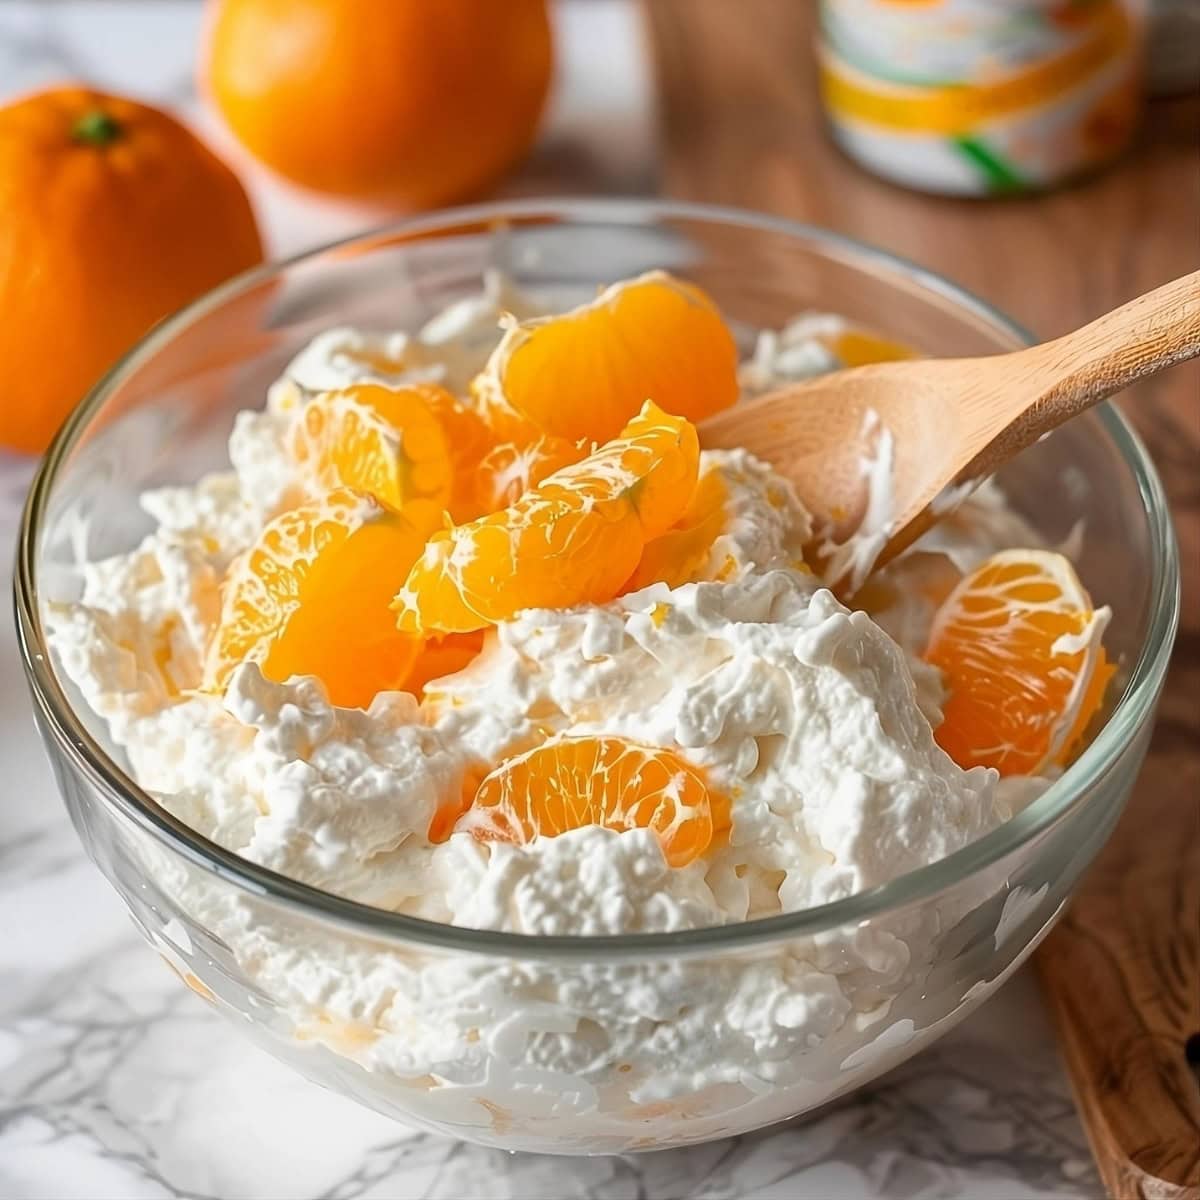 Oranges tossed in whipped cream in a glass bowl.